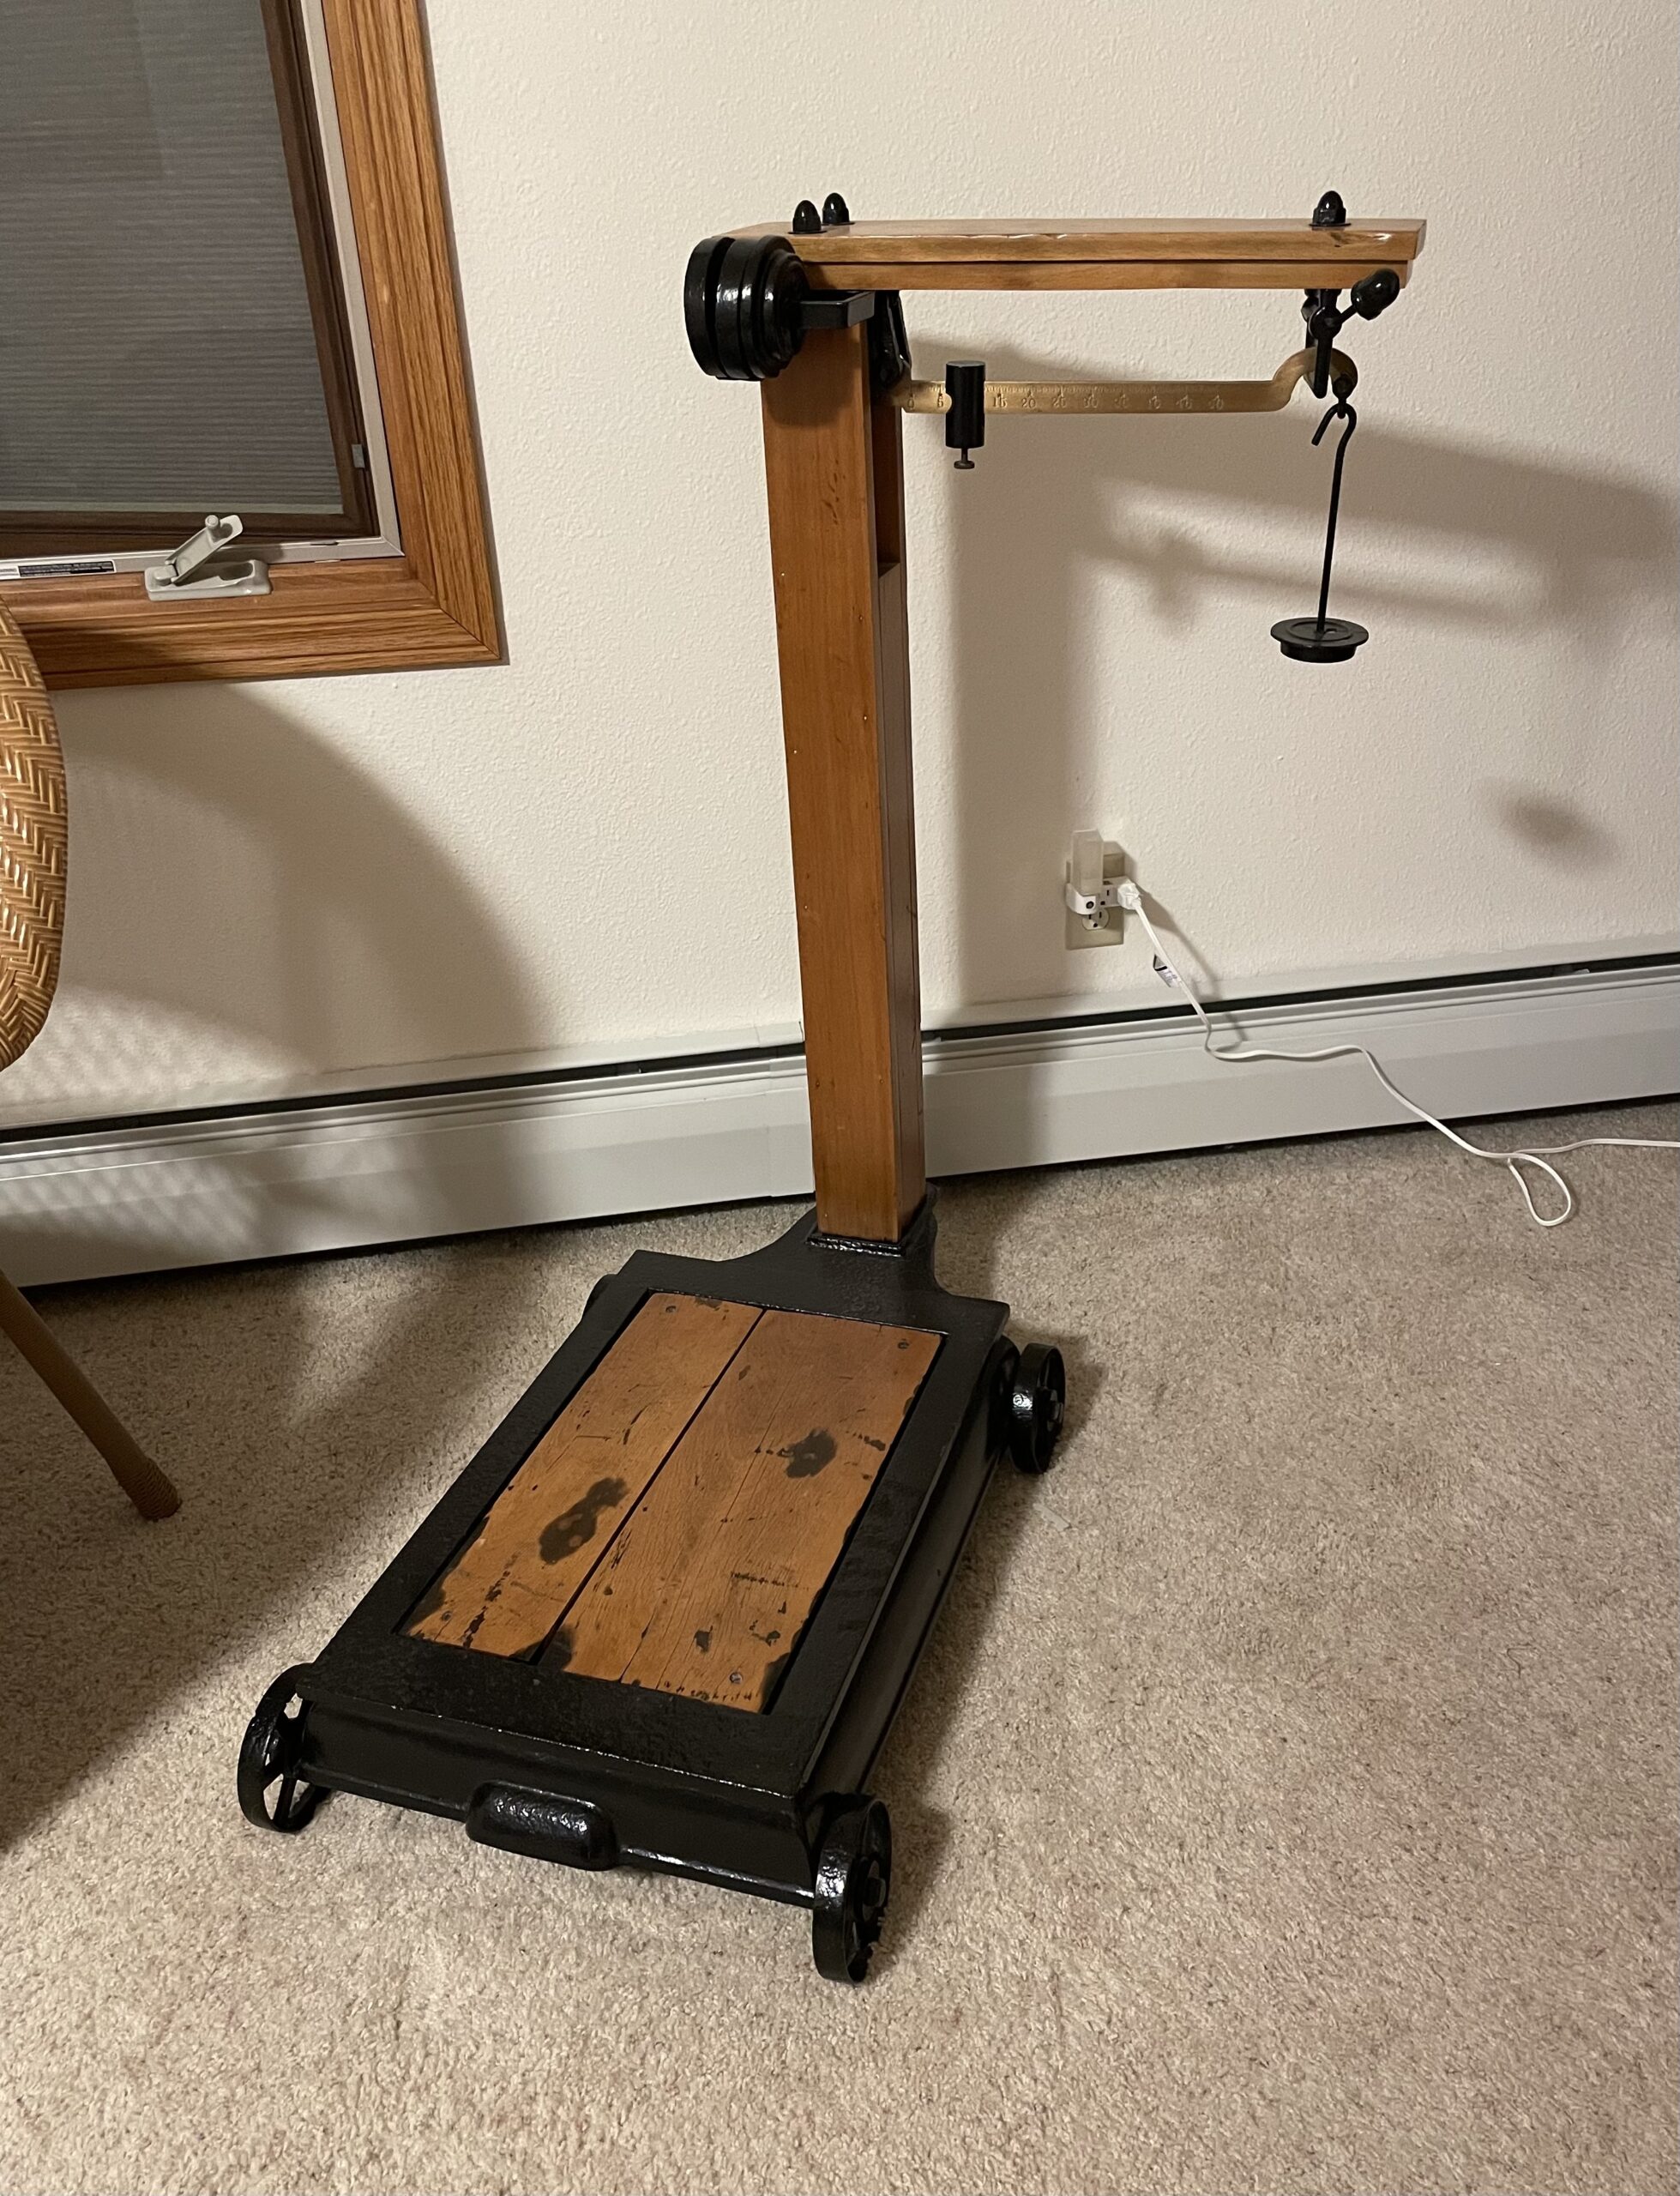 Solid Wood and Steel Antique Grain Scale, Pre-1900’s